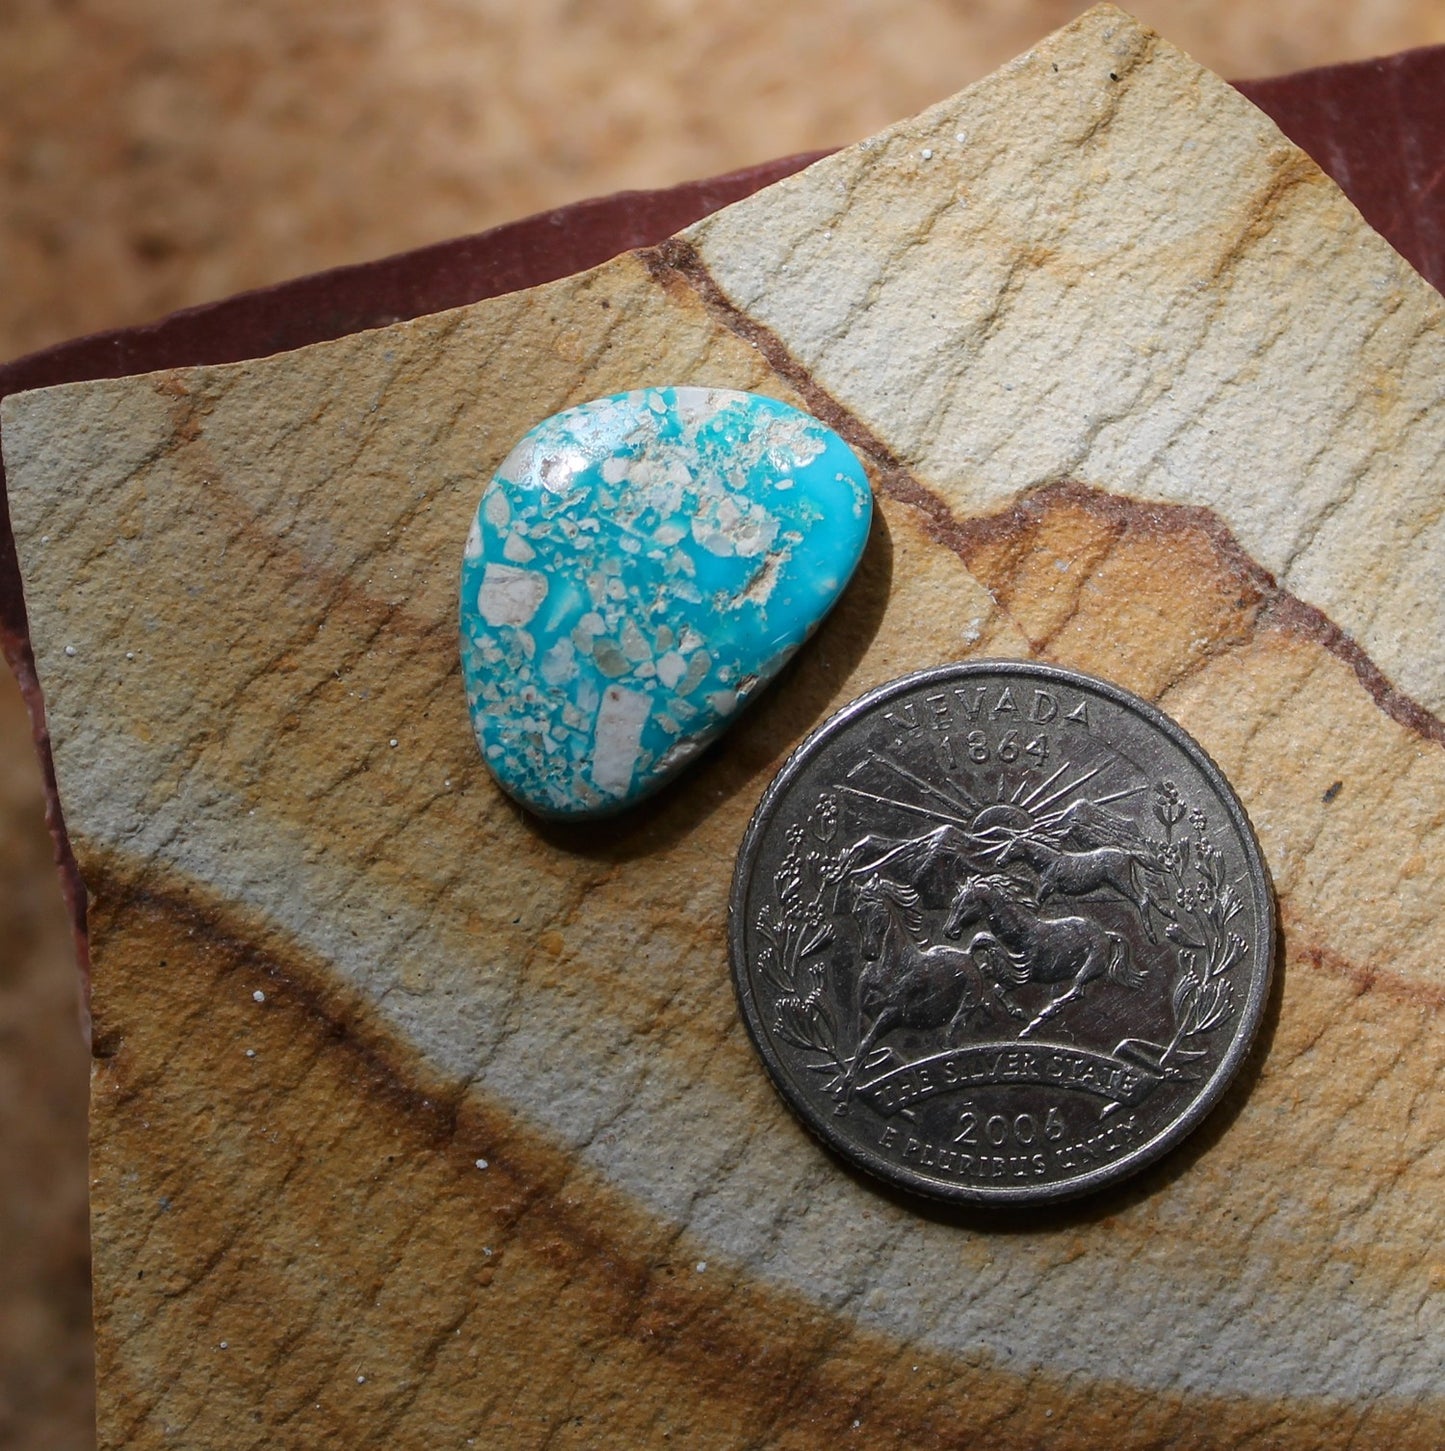 10.6 carat icy blue Stone Mountain Turquoise cabochon